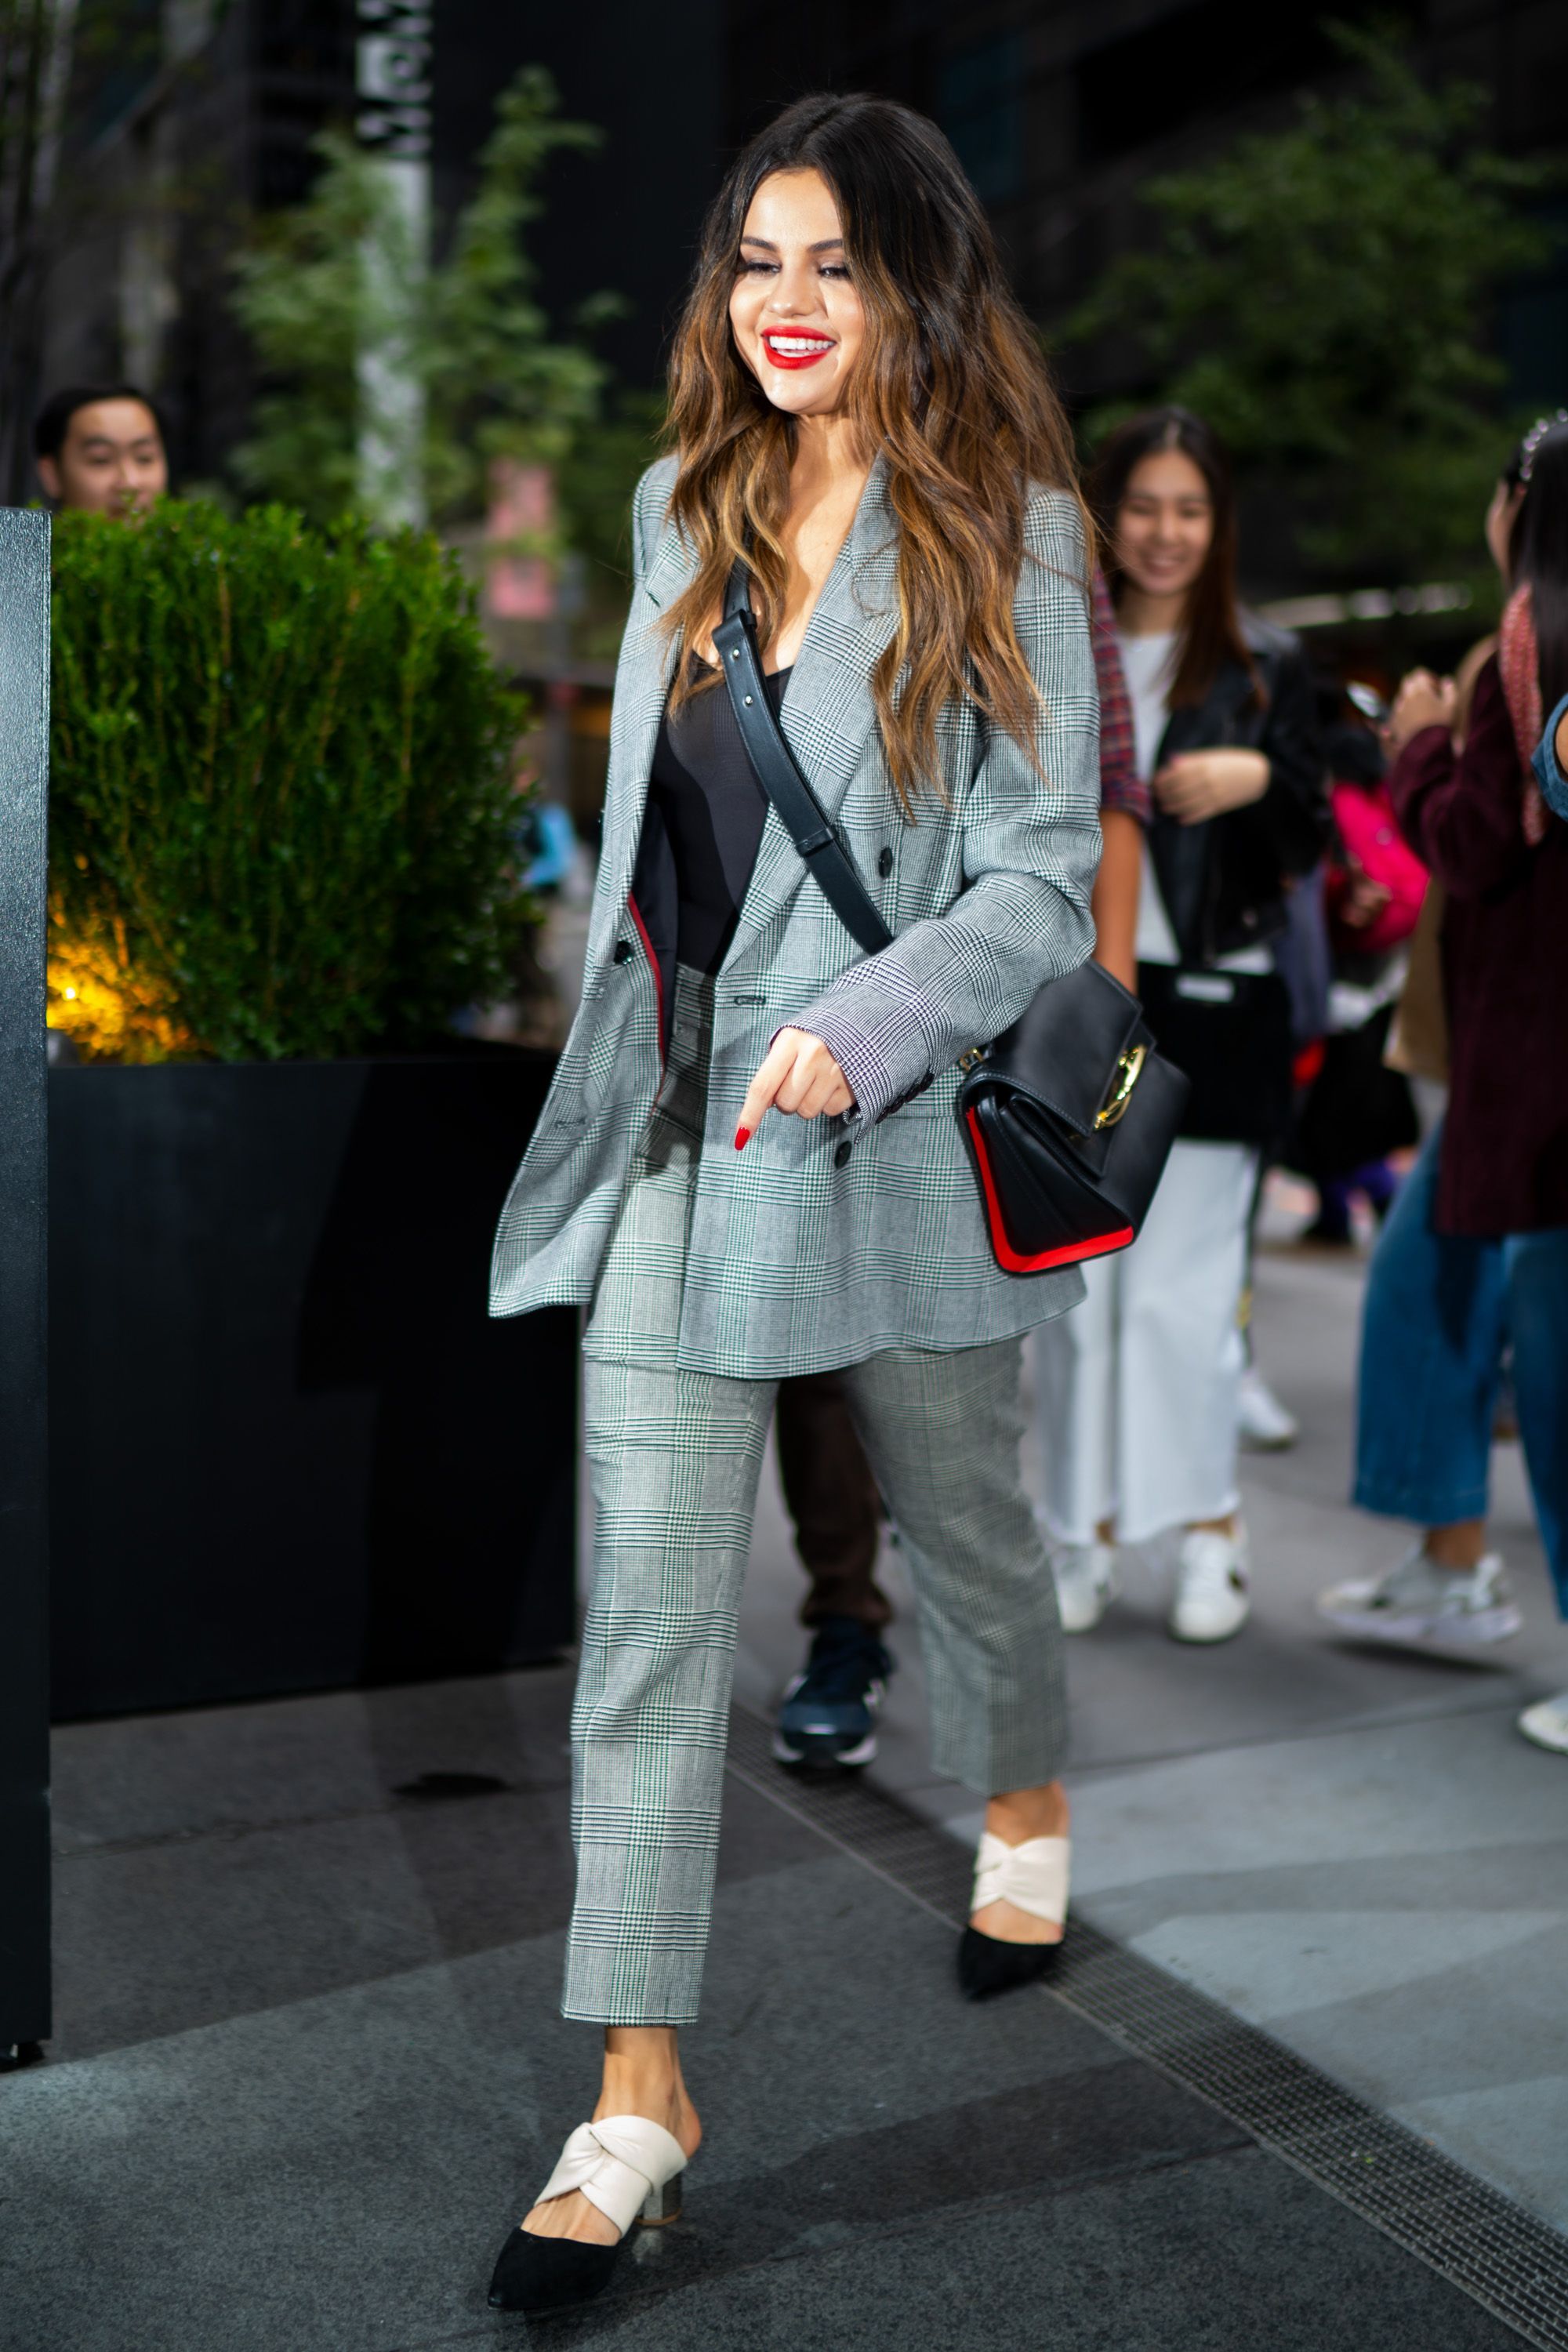 Selena Gomez's Style: Her Best Outfits To Date